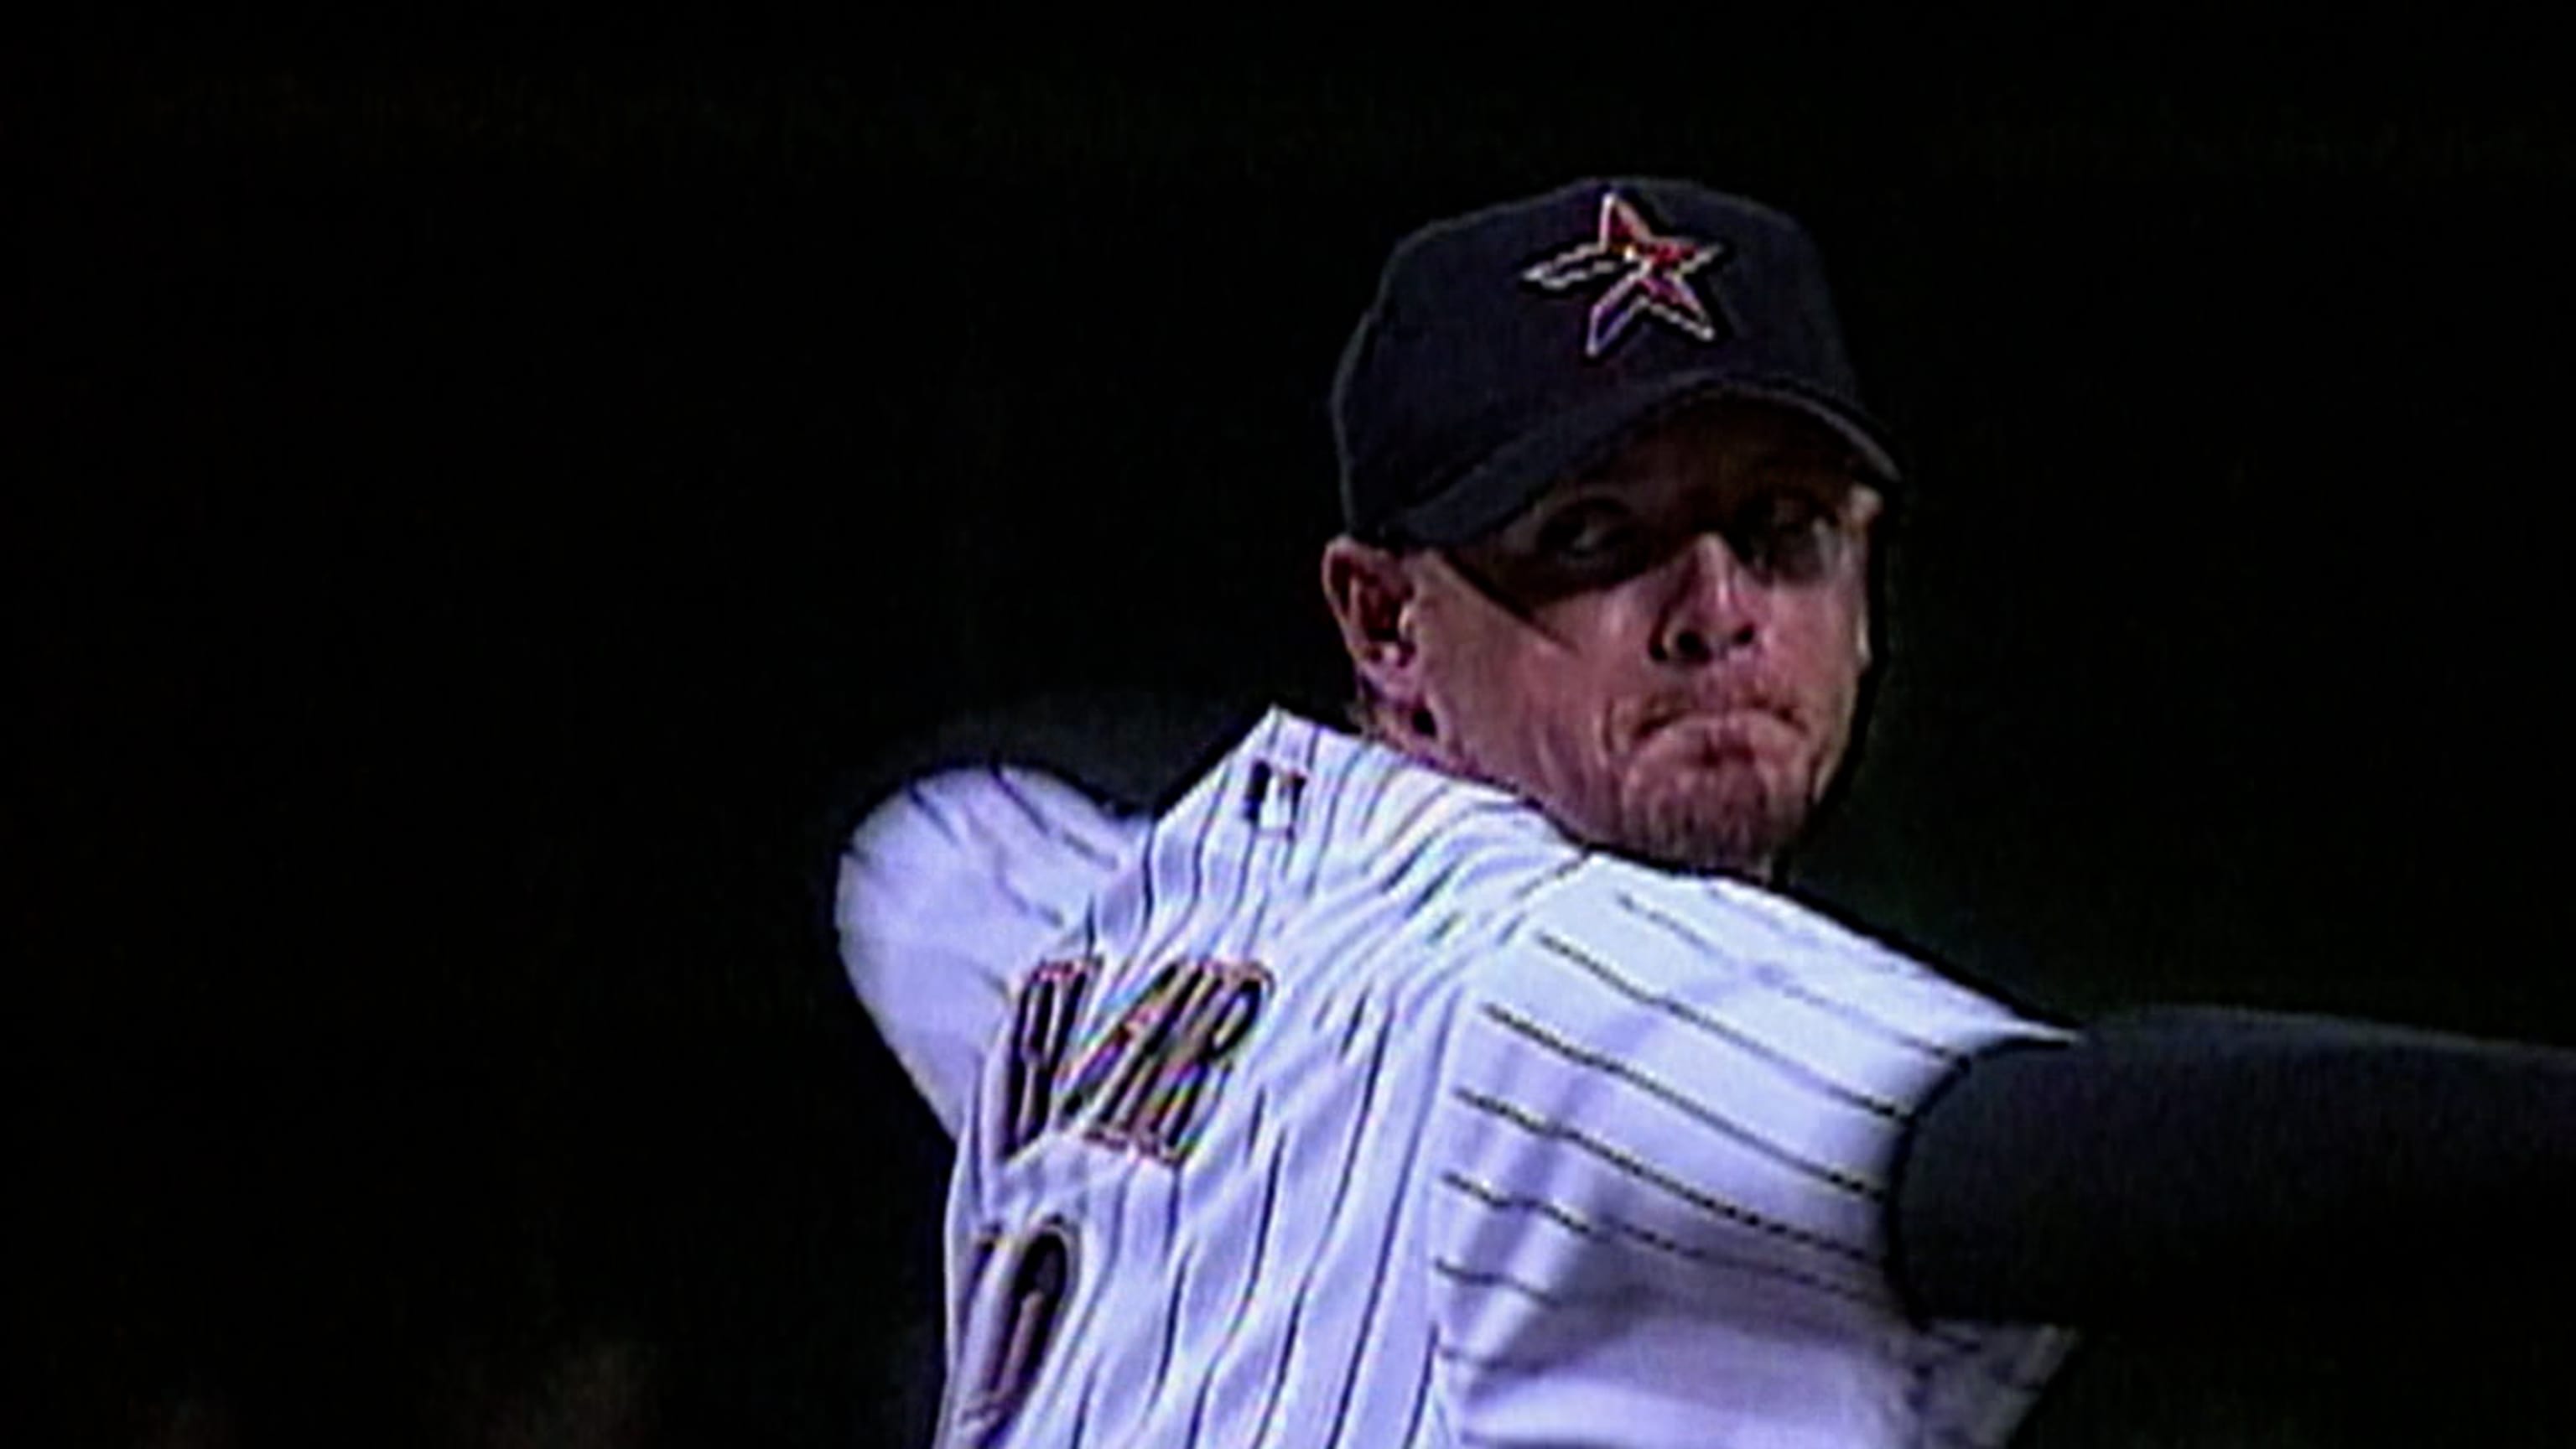 Assessing Billy Wagner's Hall of Fame candidacy - Covering the Corner